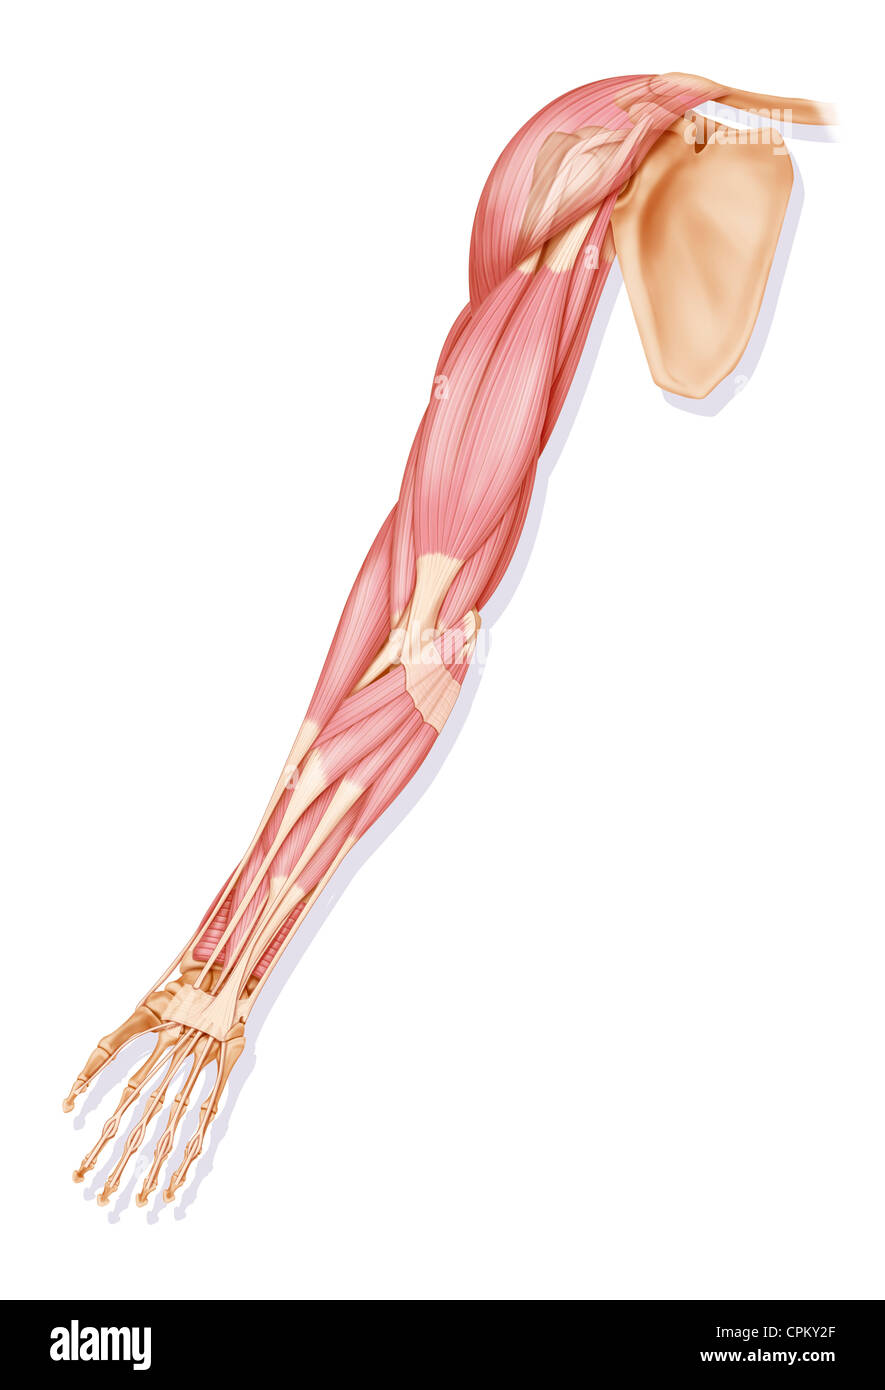 ARM MUSCLE, DRAWING Stock Photo